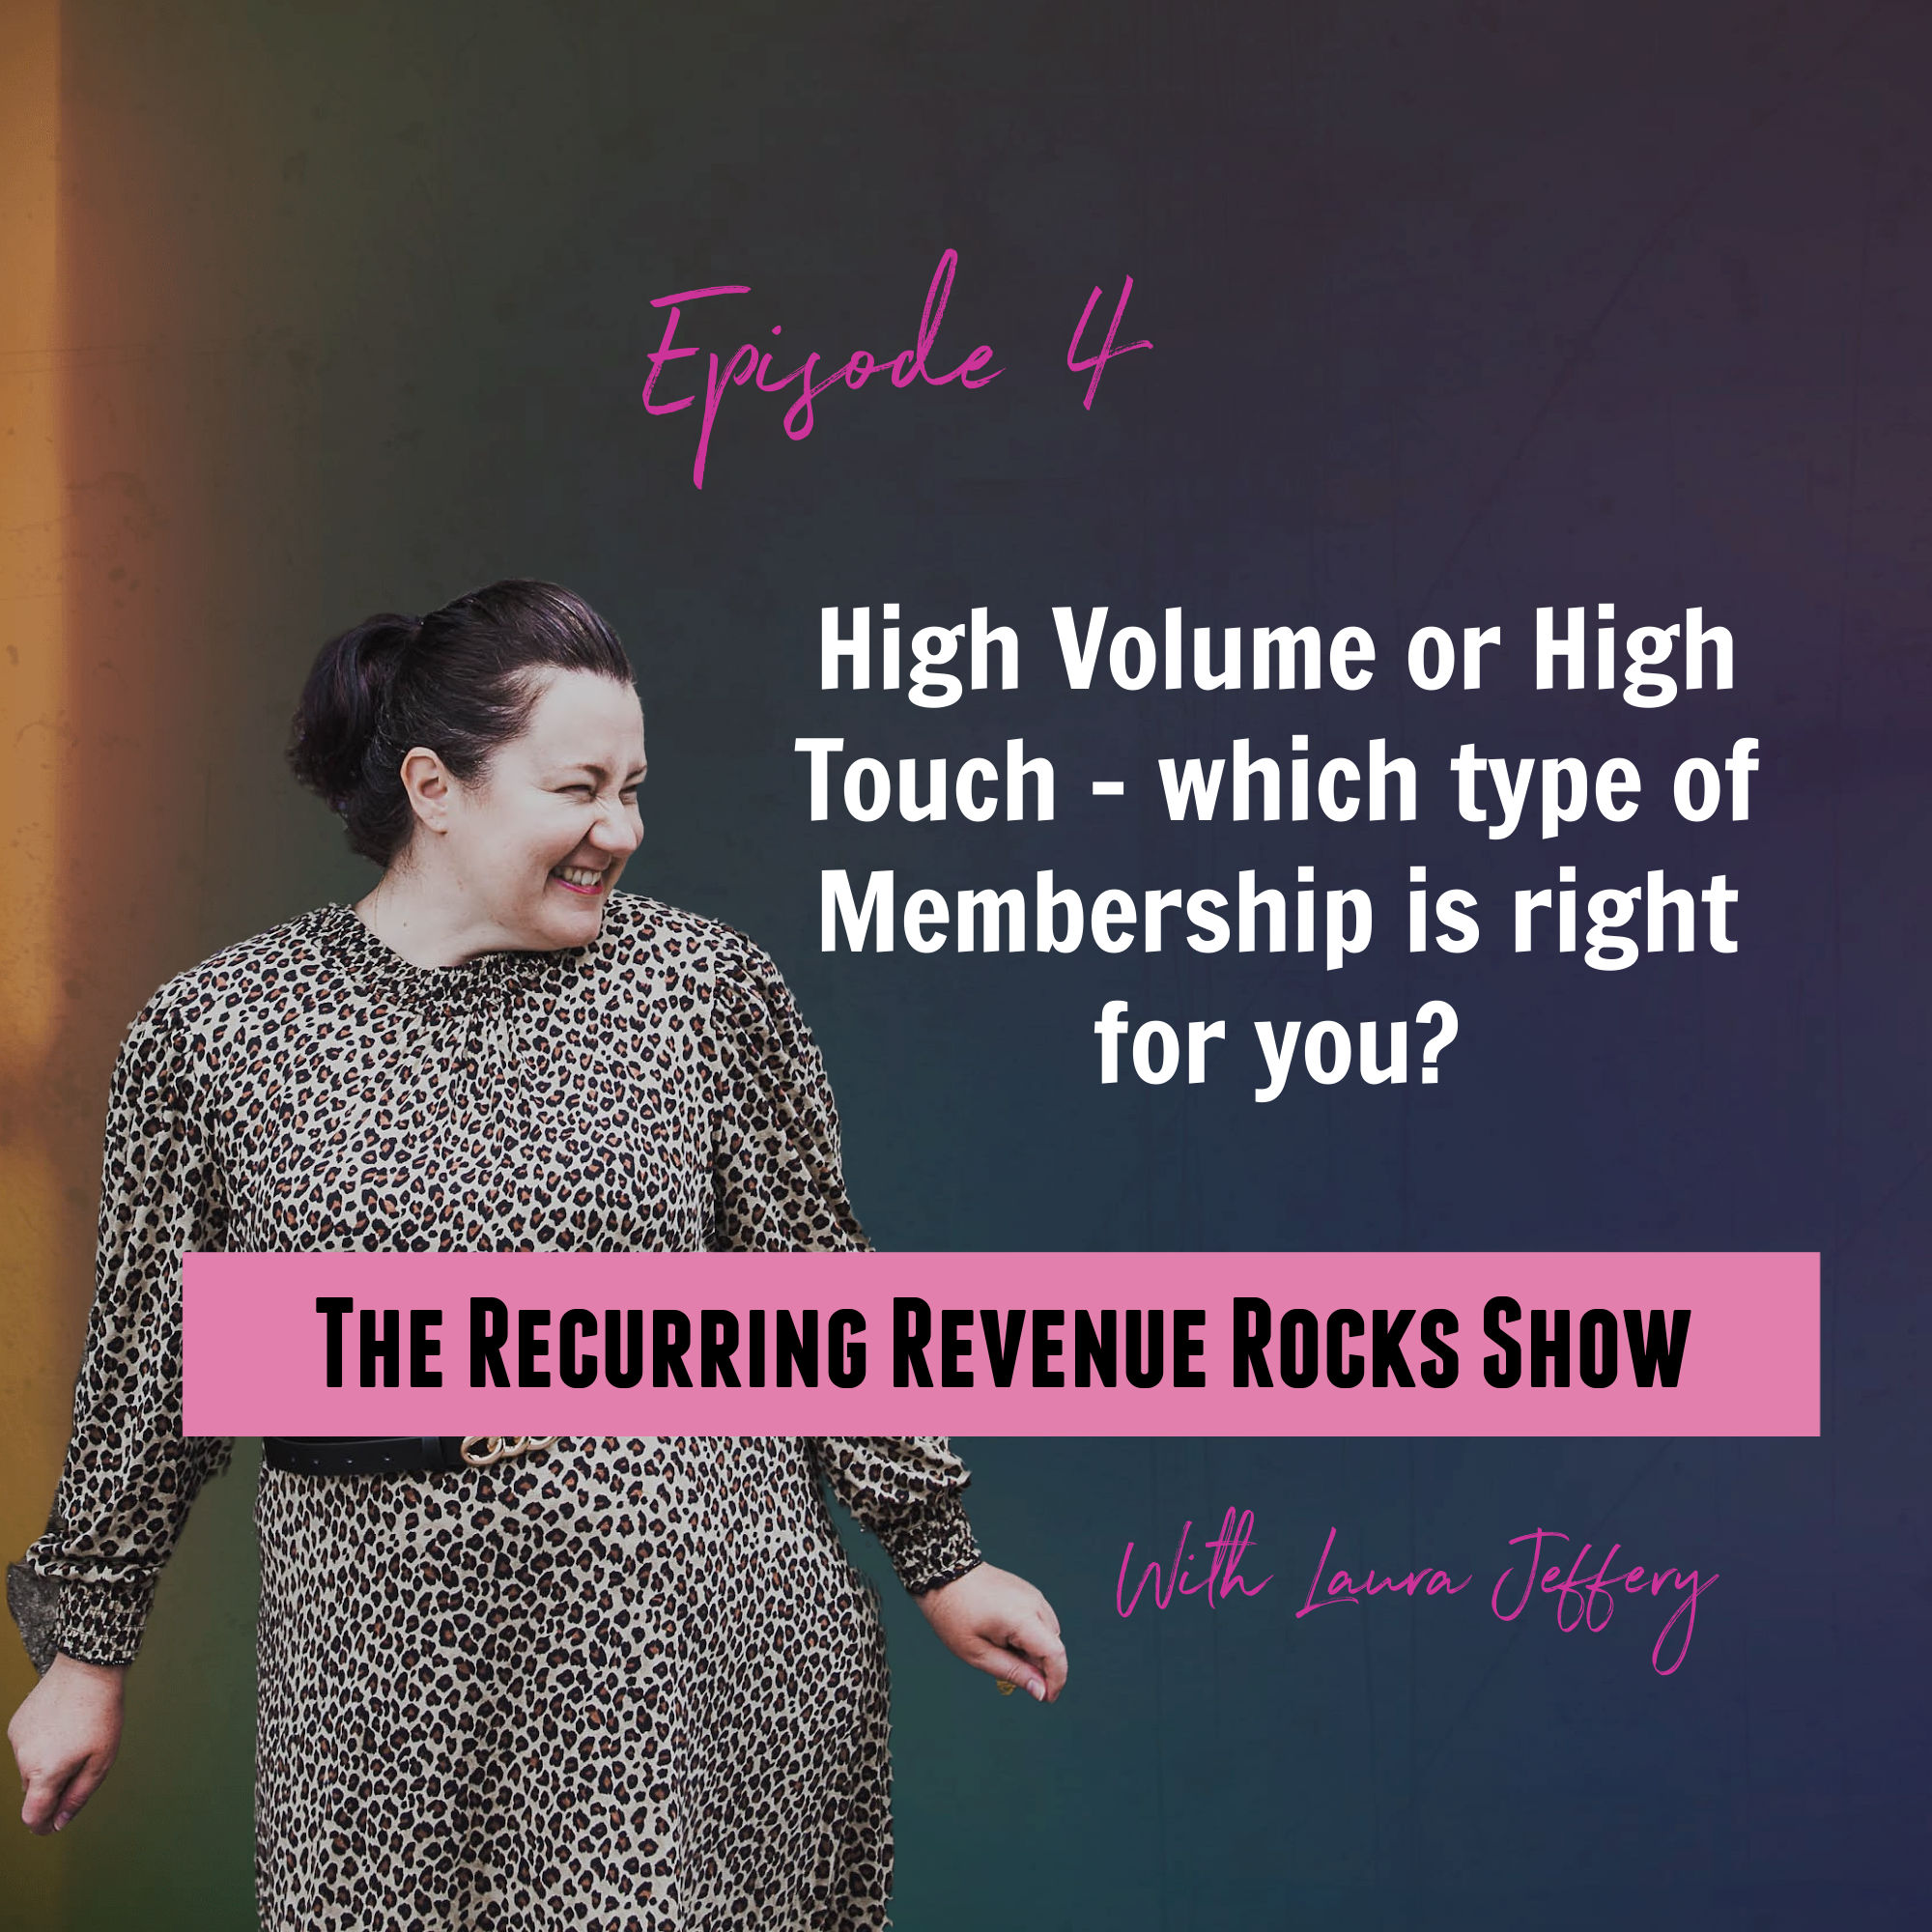 High Volume or High Touch – which type of Membership is right for you?